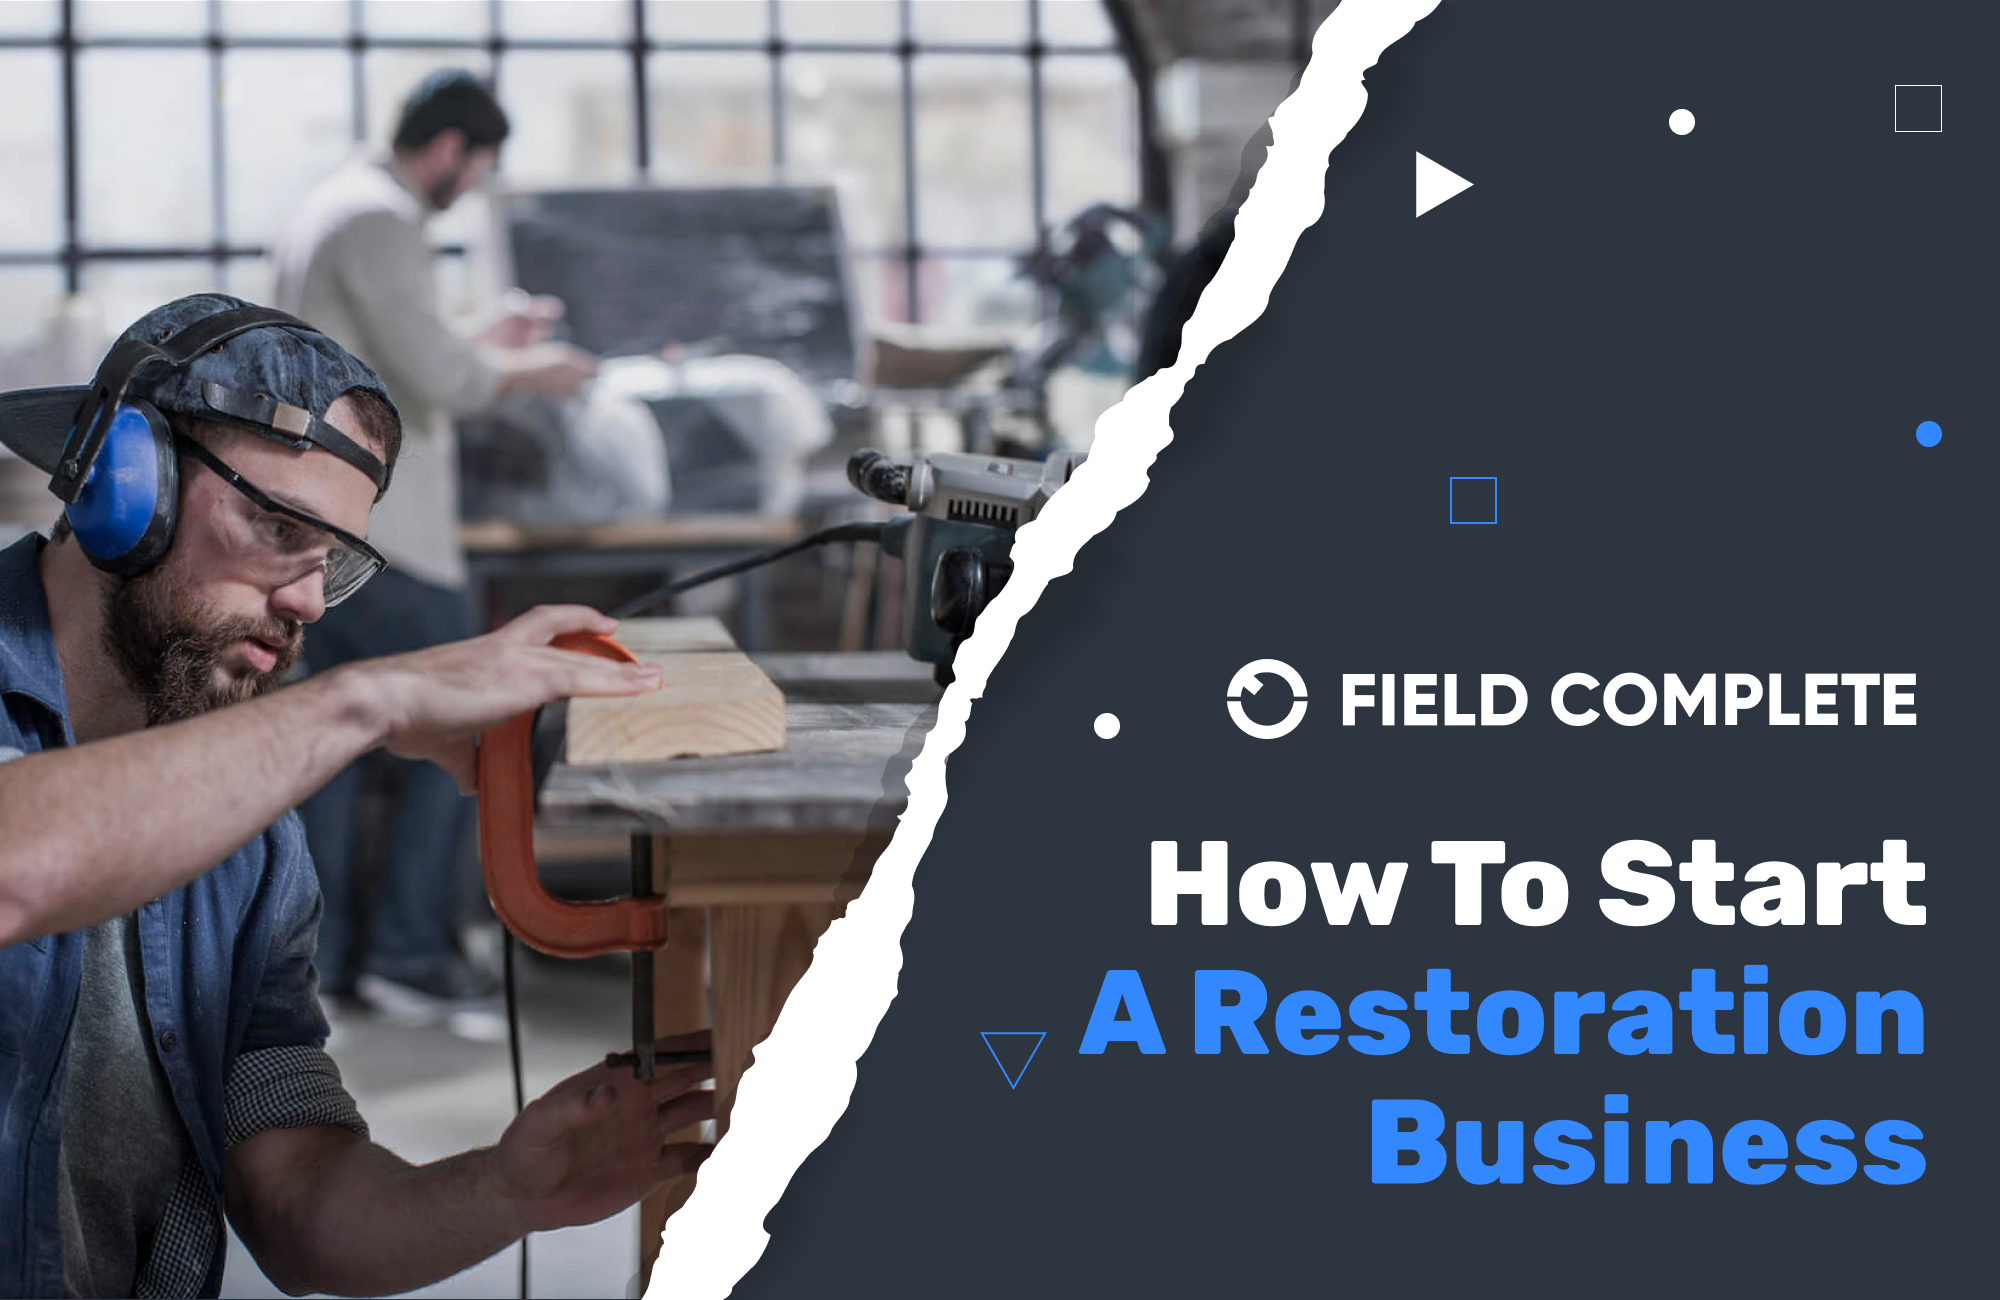 How To Start A Restoration Business